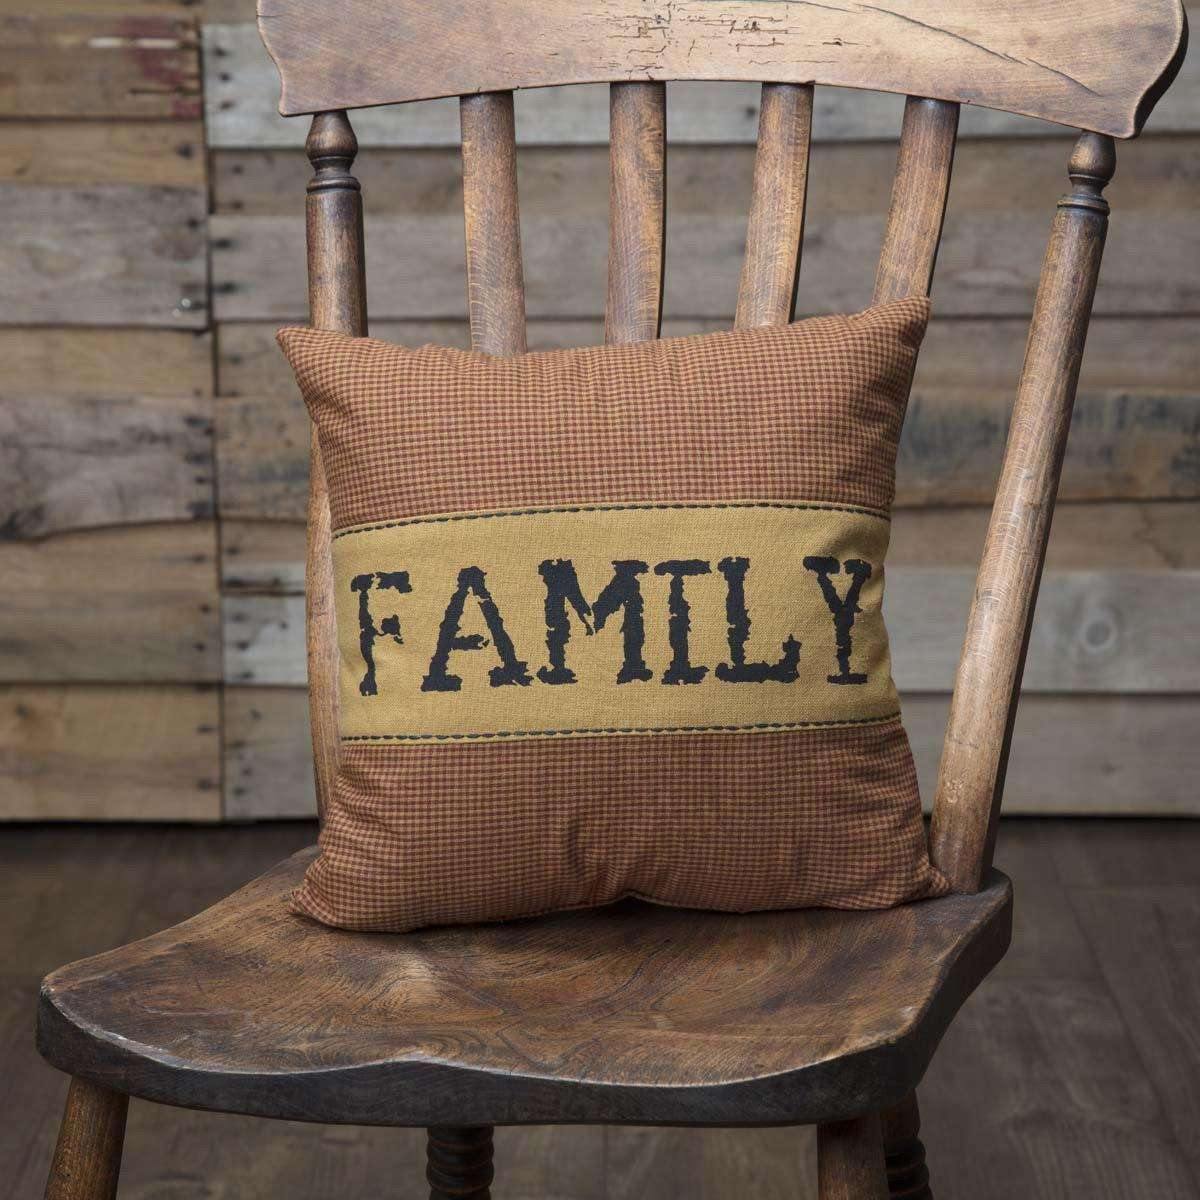 Heritage Farms Family Pillow 12x12 VHC Brands online